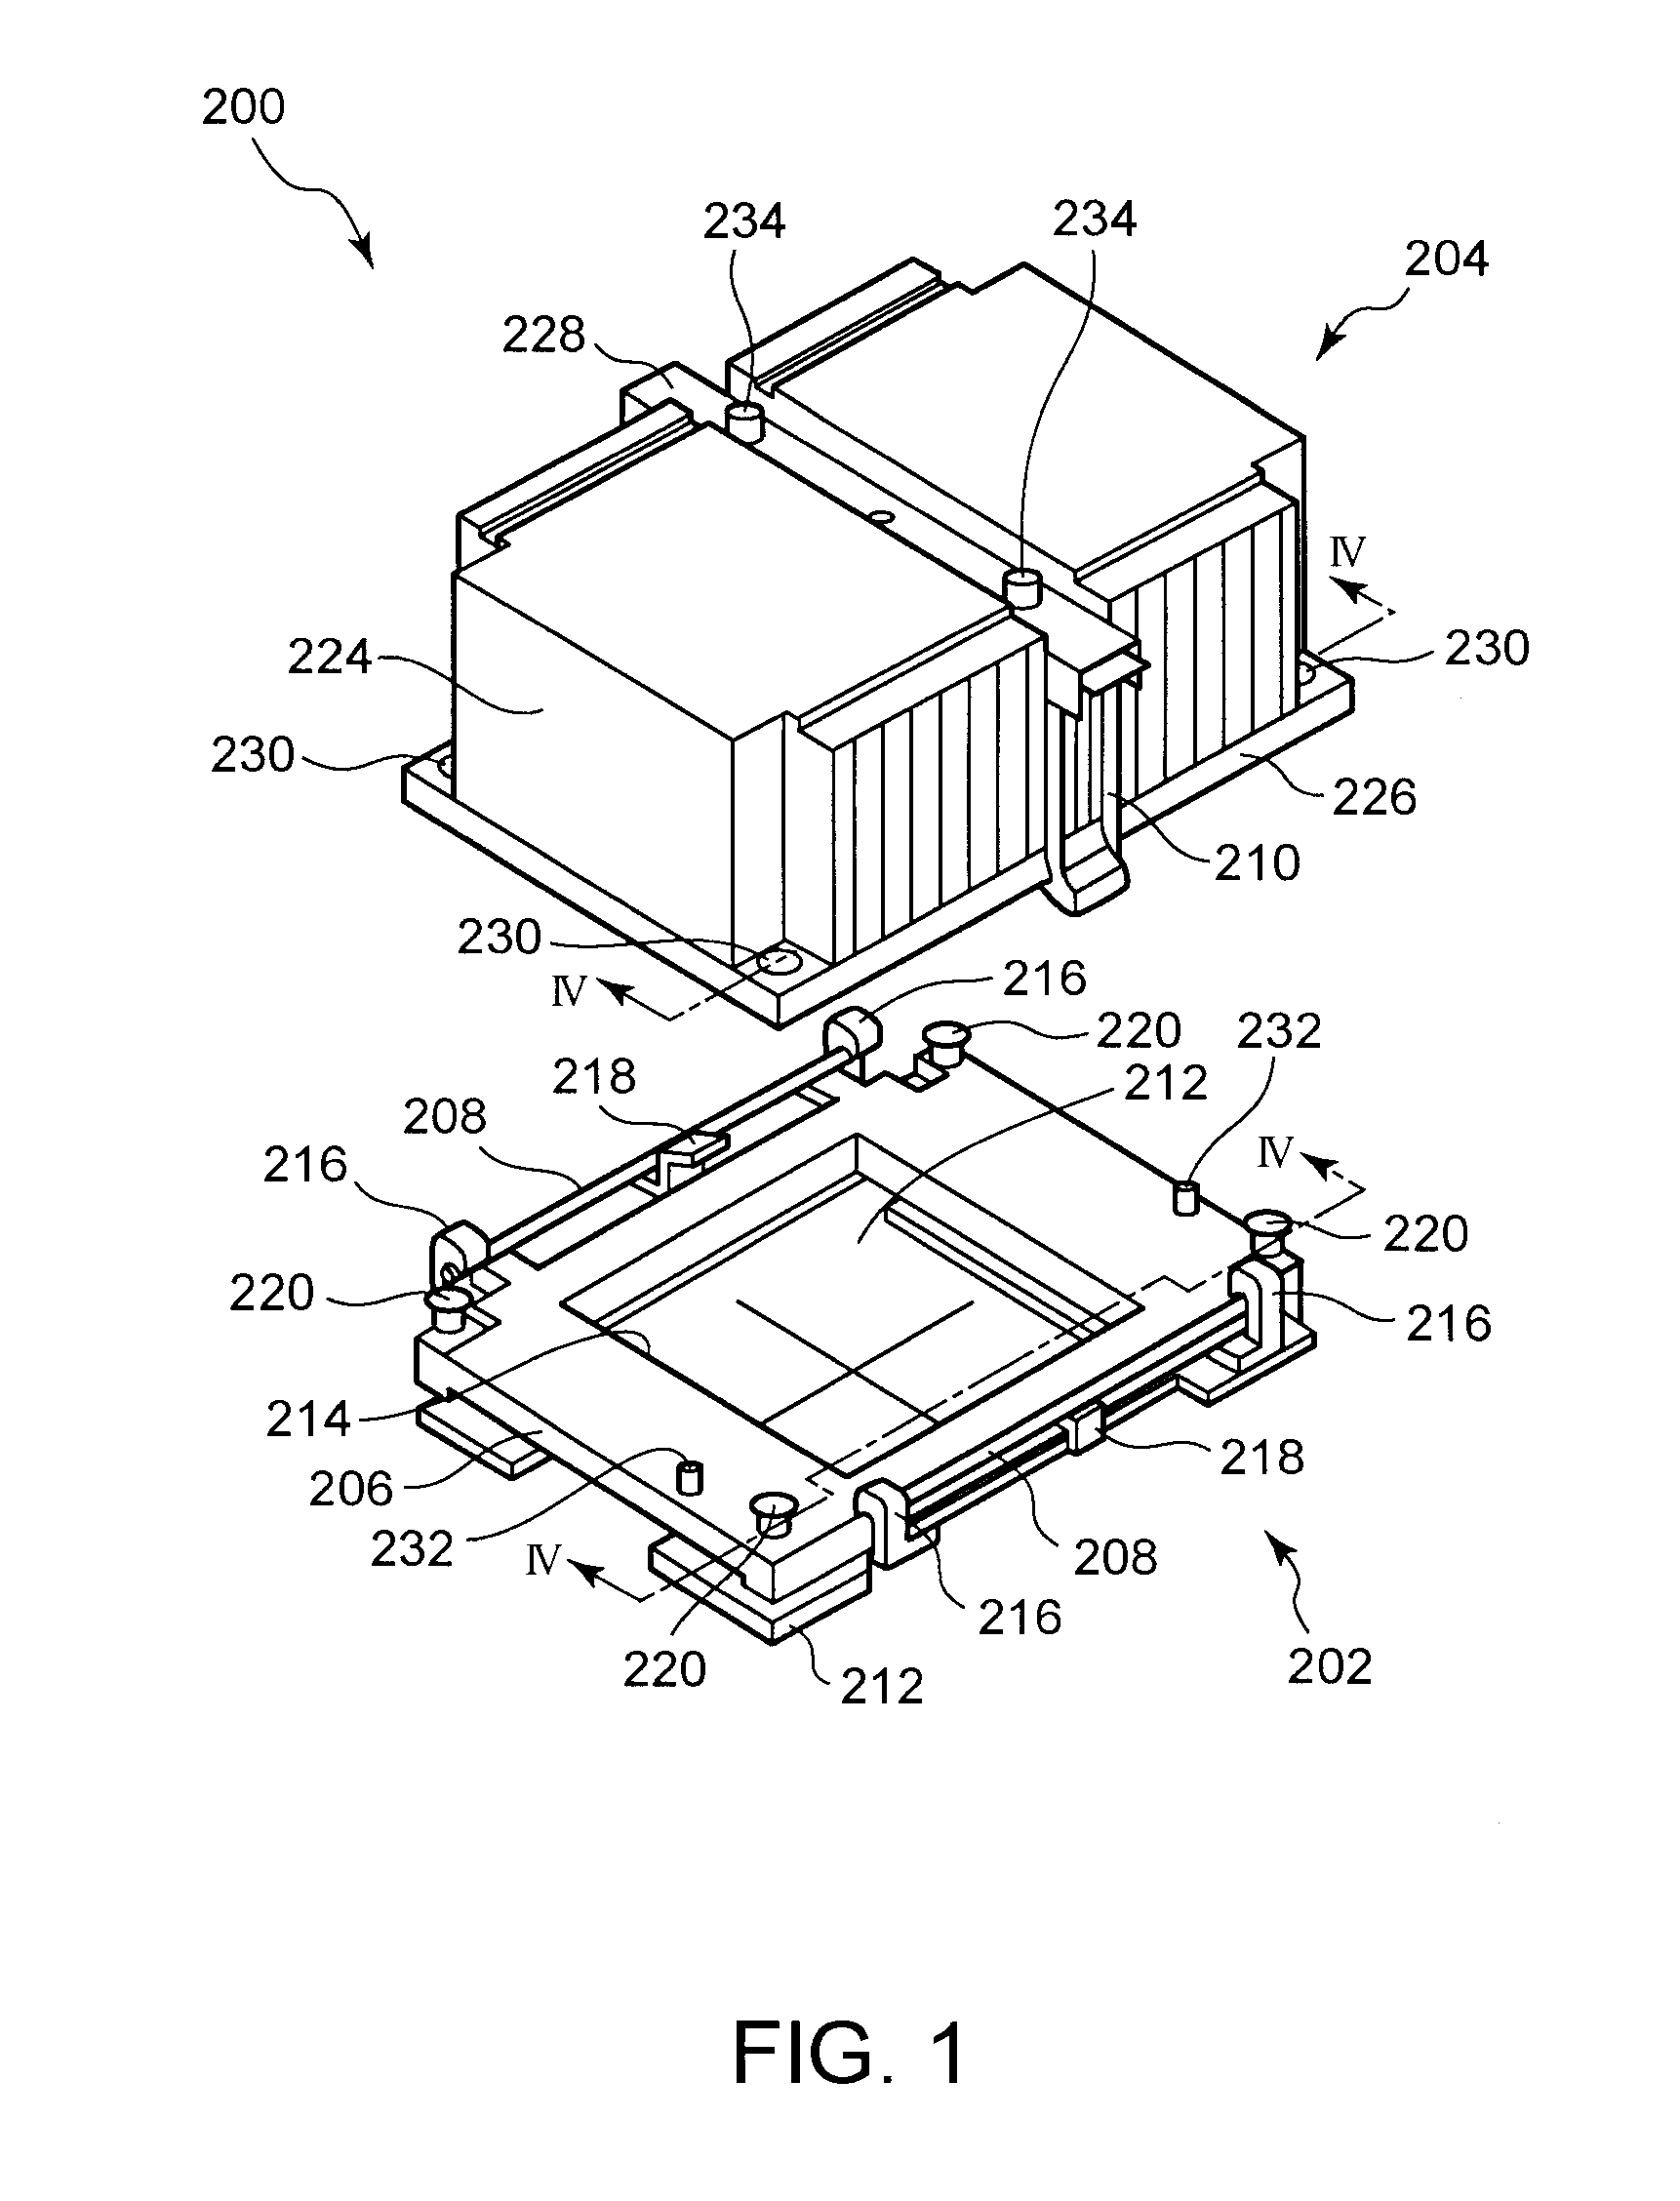 Non-influencing fastener for mounting a heat sink in contact with an electronic component